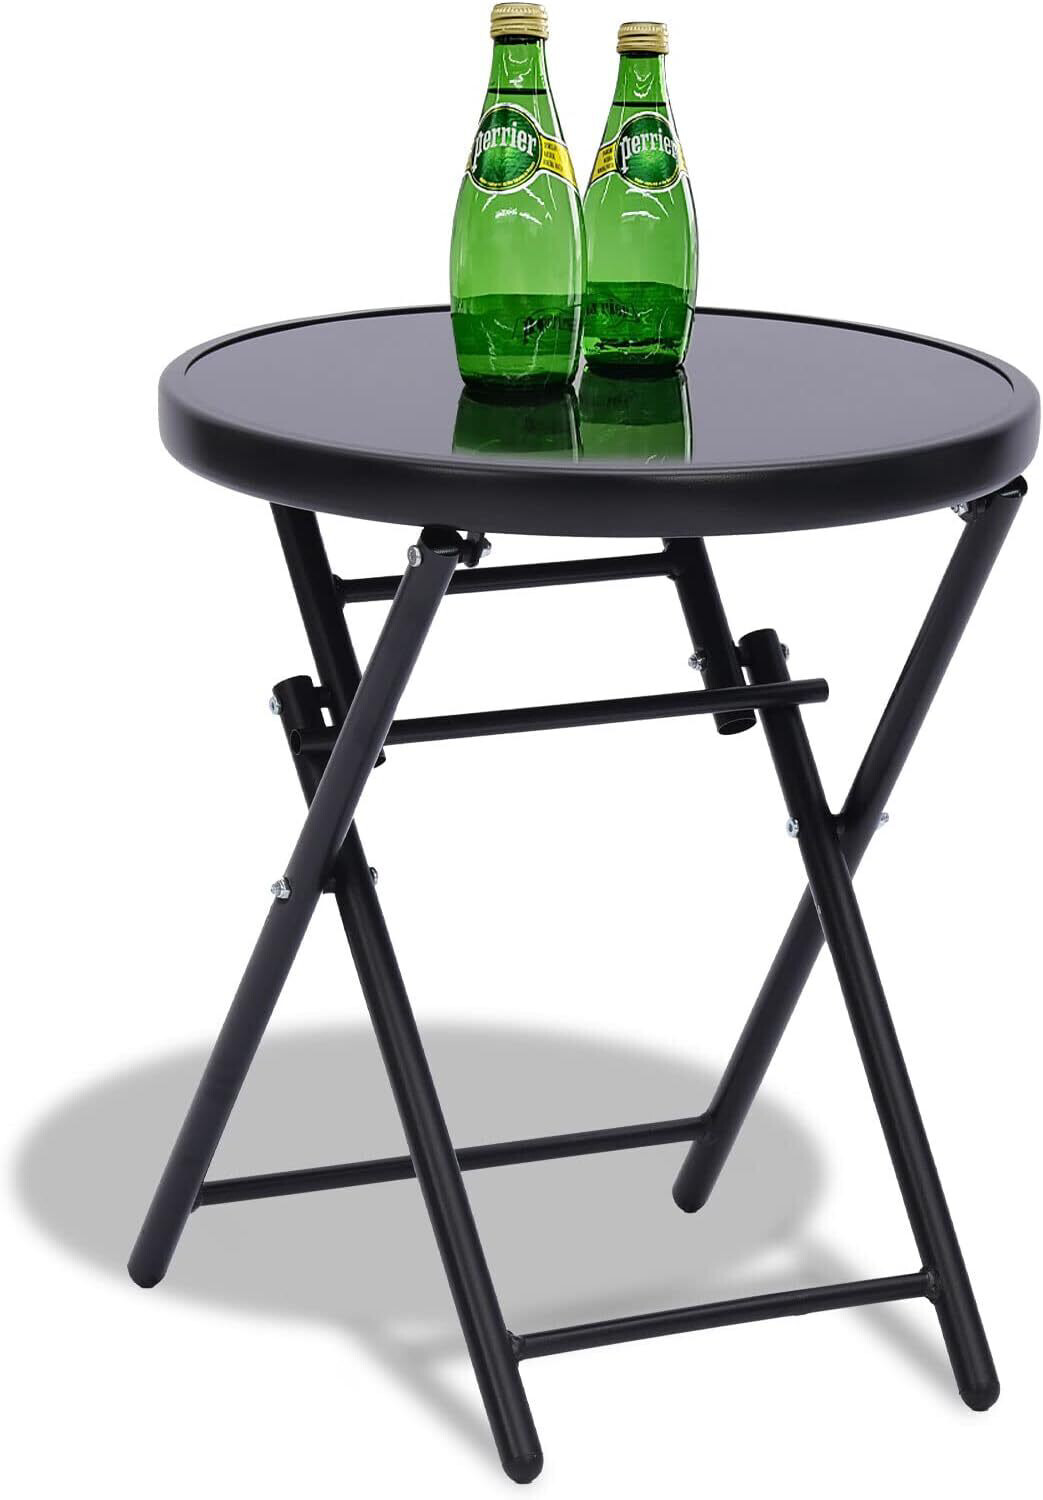 Round Folding Side Accent Coffee Tea Table Tempered Glass Top Metal End Table Indoor Outdoor for Backyard Balcony Poolside Sunroom- Black PlanetSky 80cm #4002406